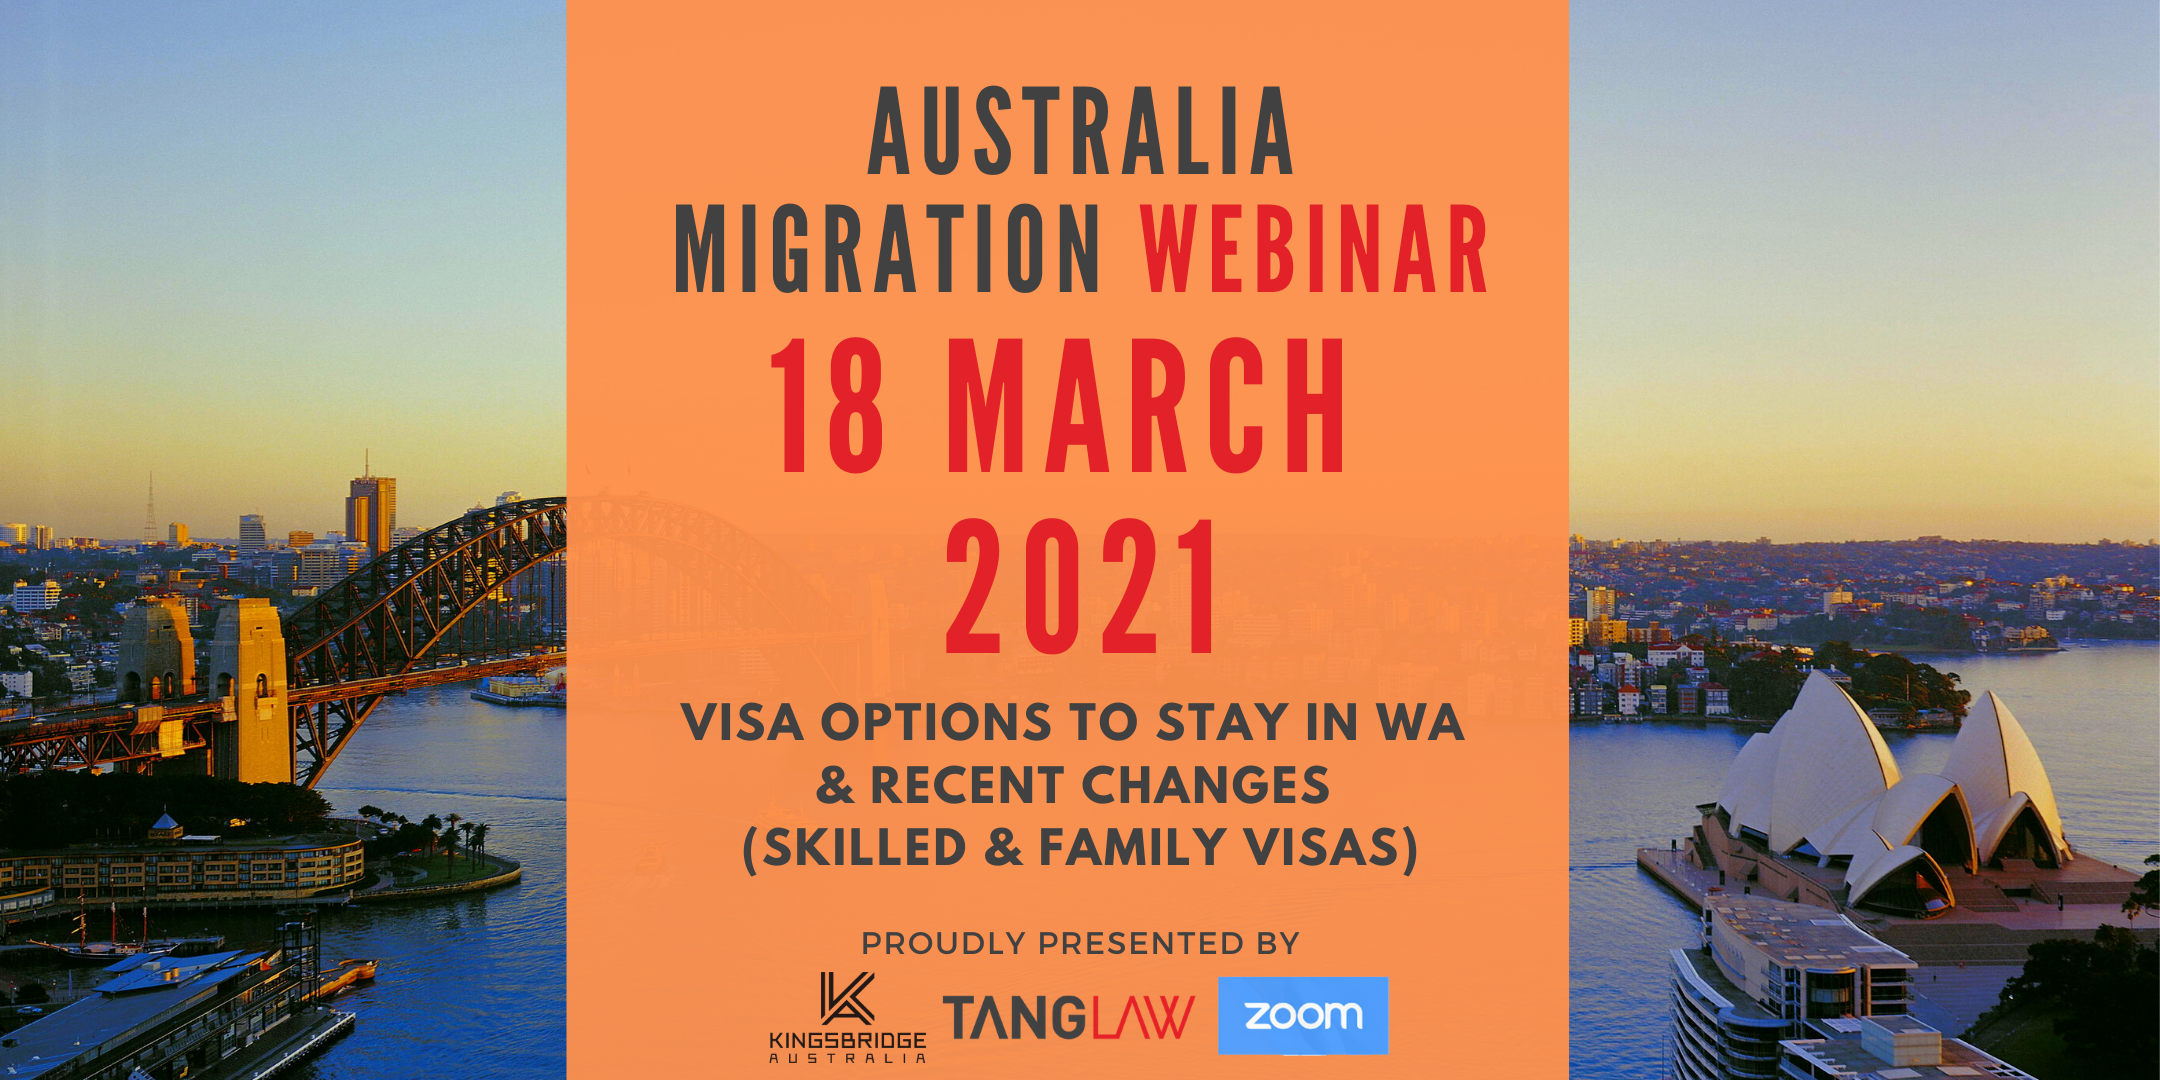 Visa Options to Stay in WA and Recent Changes (Skilled and Family Visas)